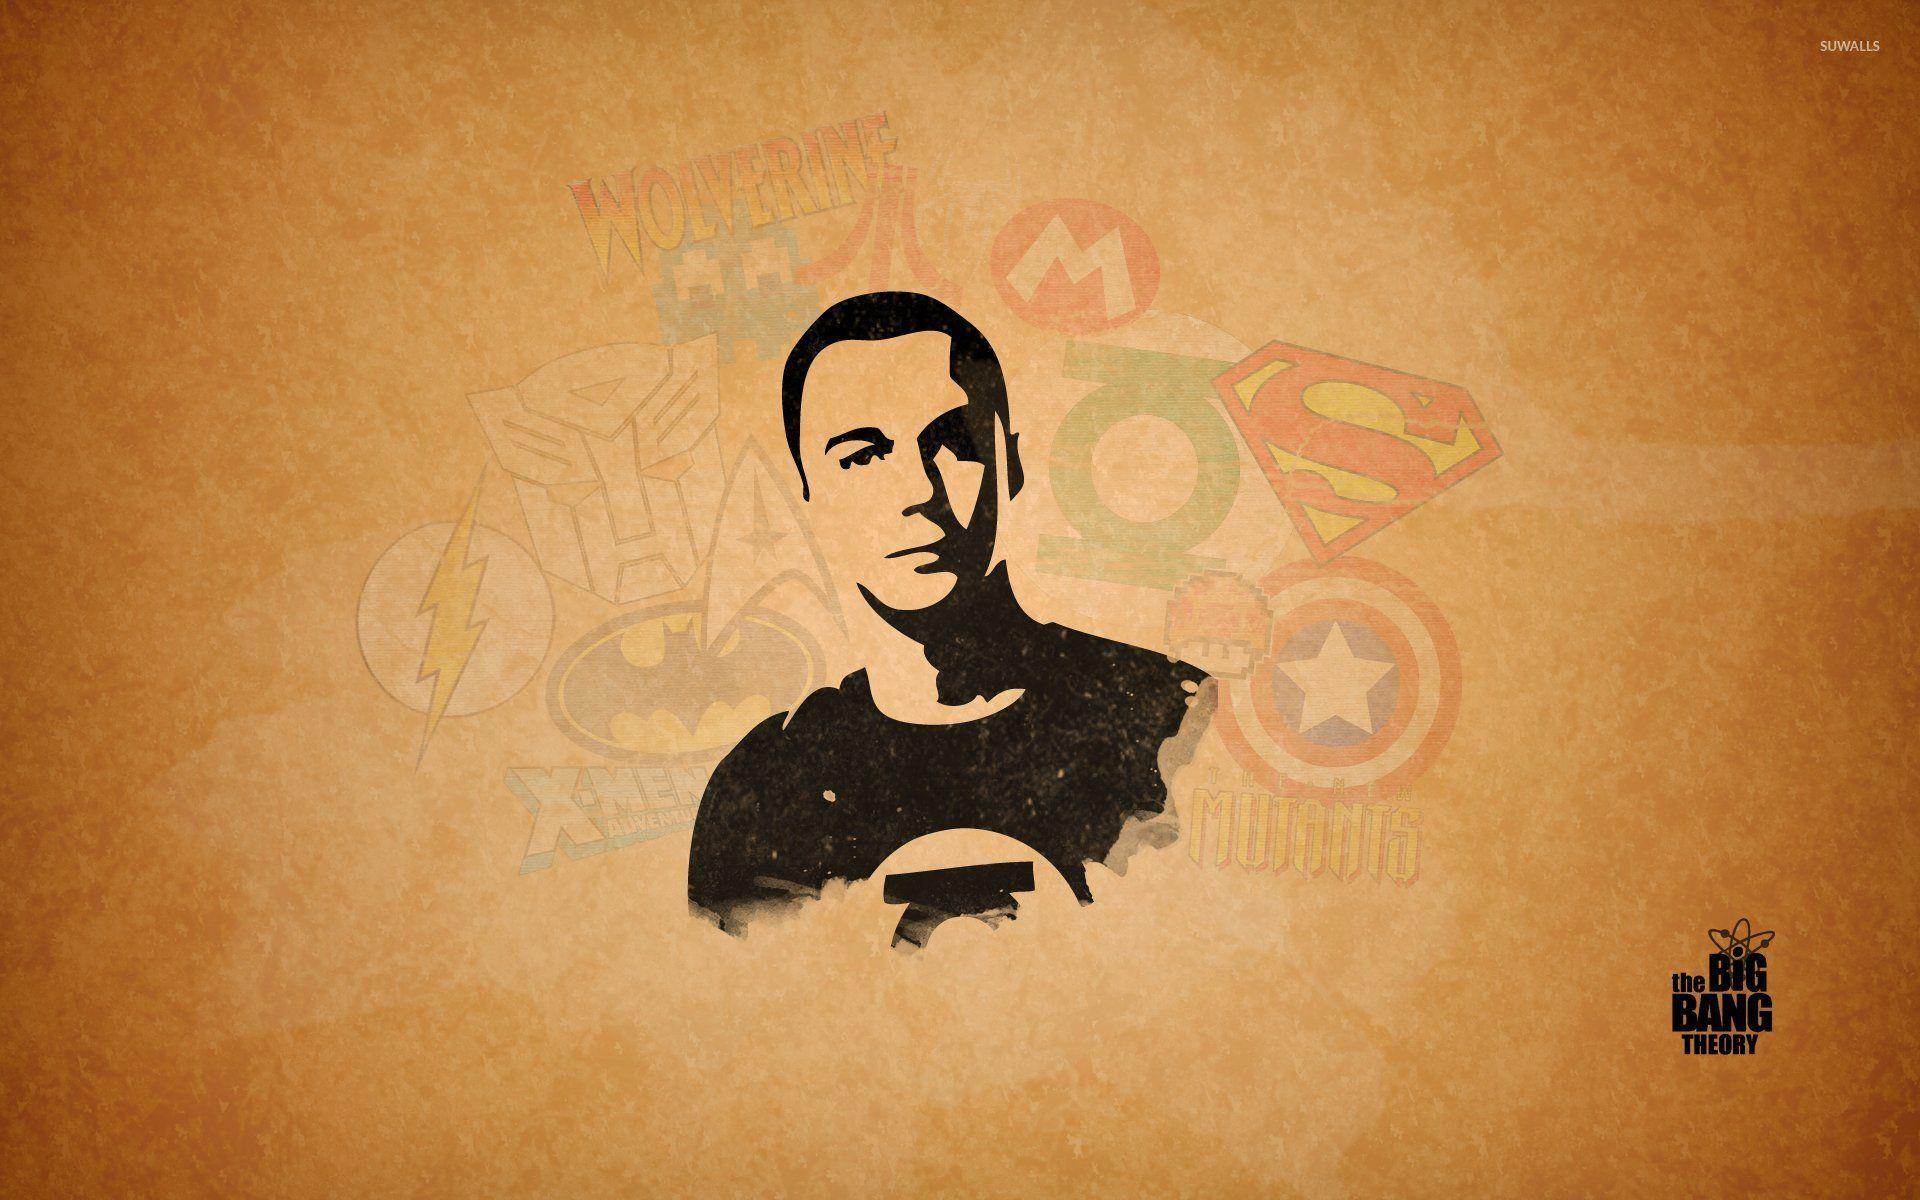 Sheldon Cooper from The Big Bang Theory wallpaper Show